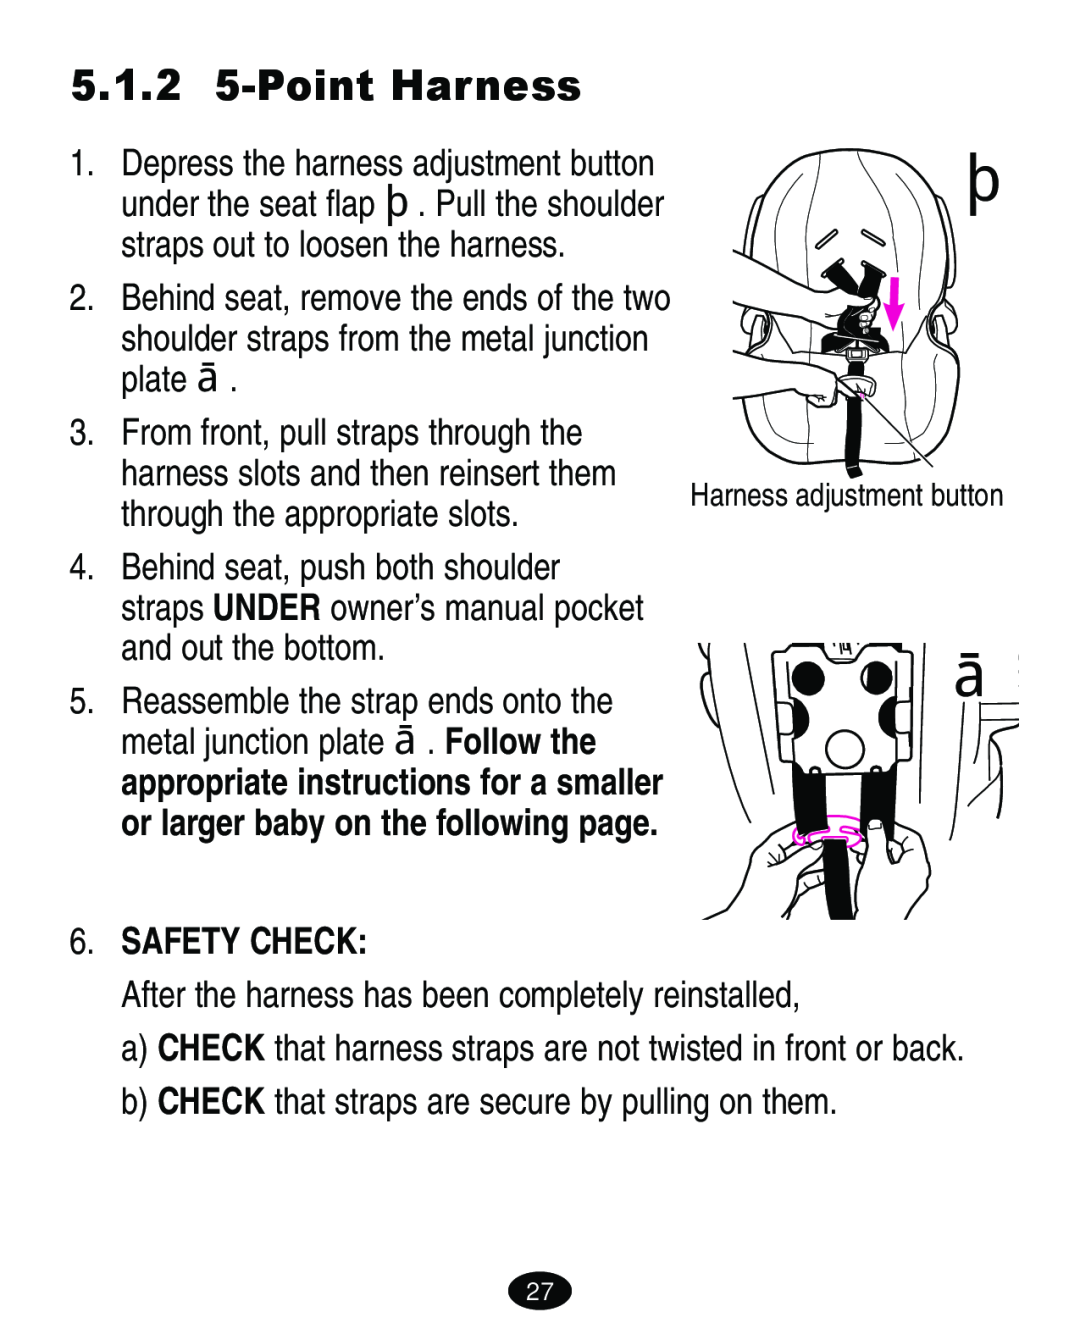 Graco 4460402 manual 5.1.2 5-Point Harness, Safety Check 